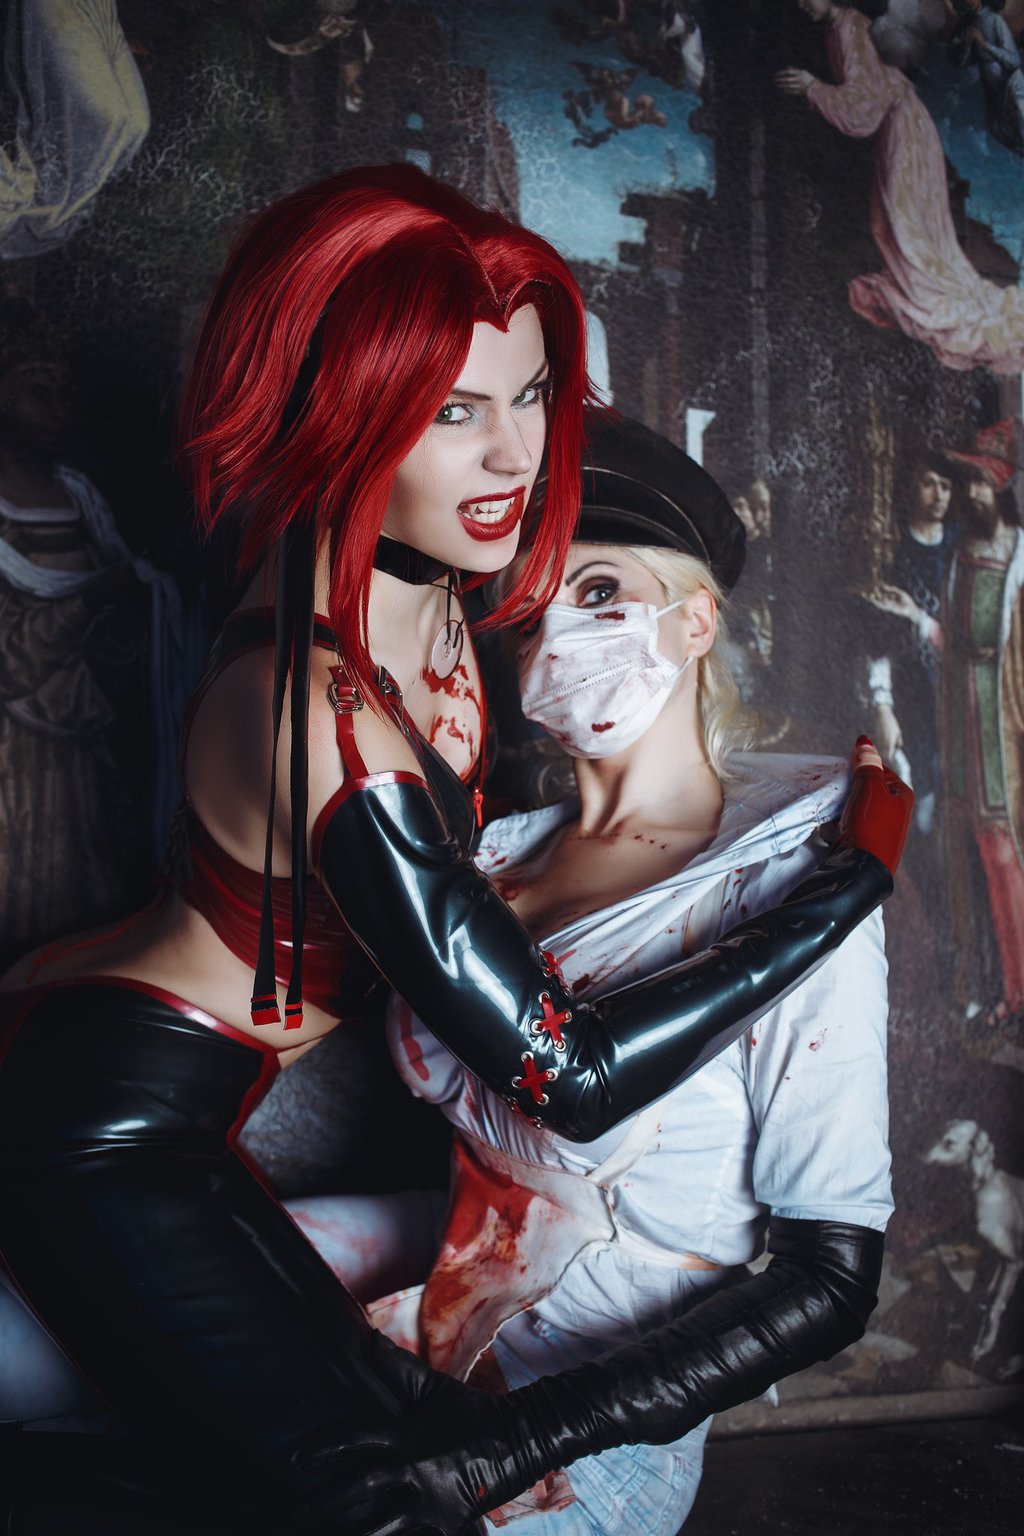 Bloodrayne Backgrounds, Compatible - PC, Mobile, Gadgets| 1024x1536 px